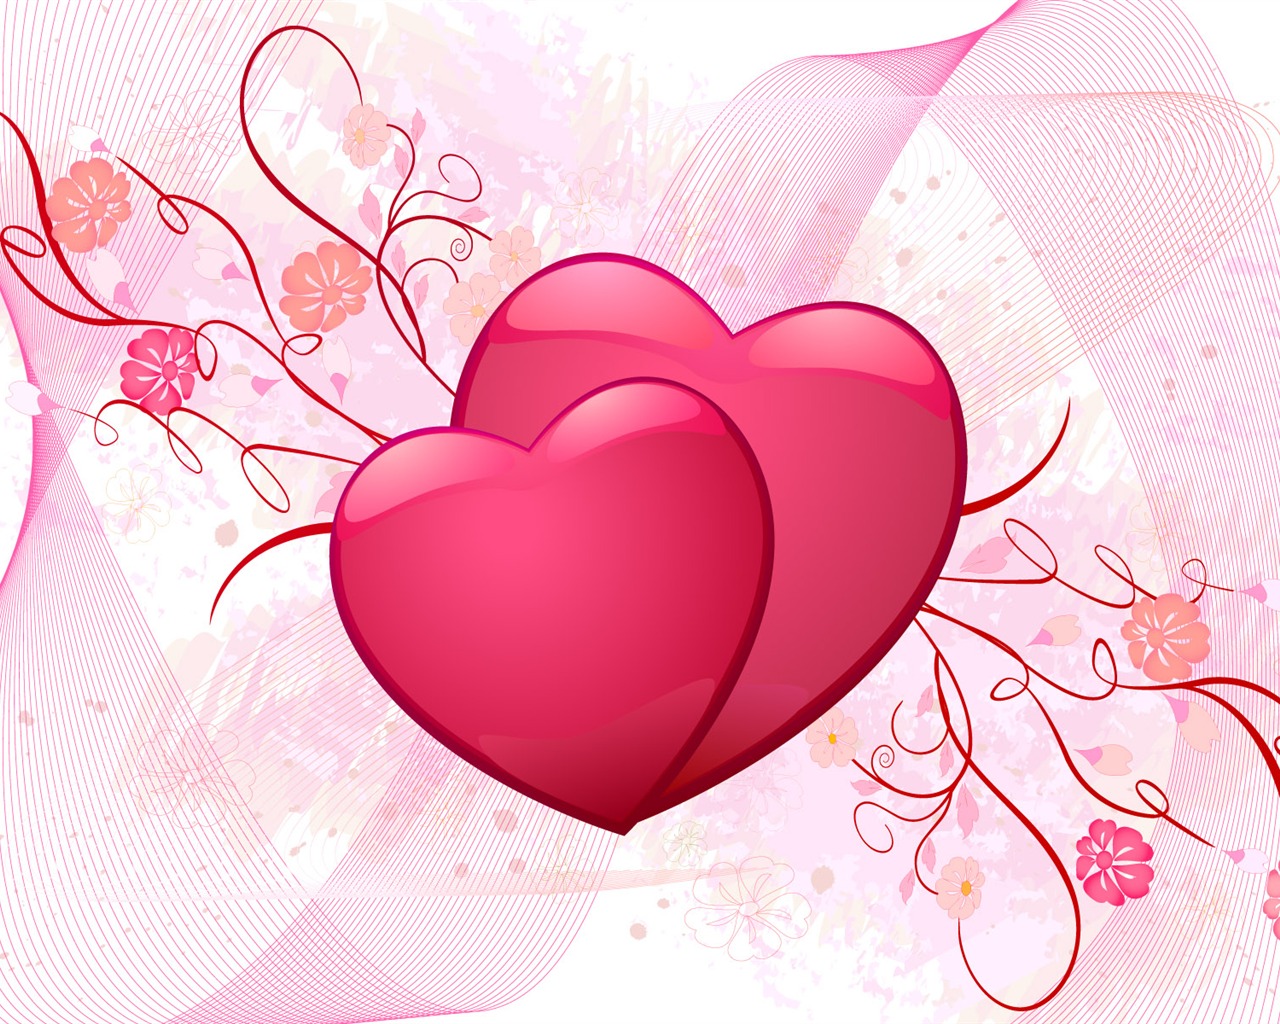 Valentine's Day Love Theme Wallpapers #24 - 1280x1024